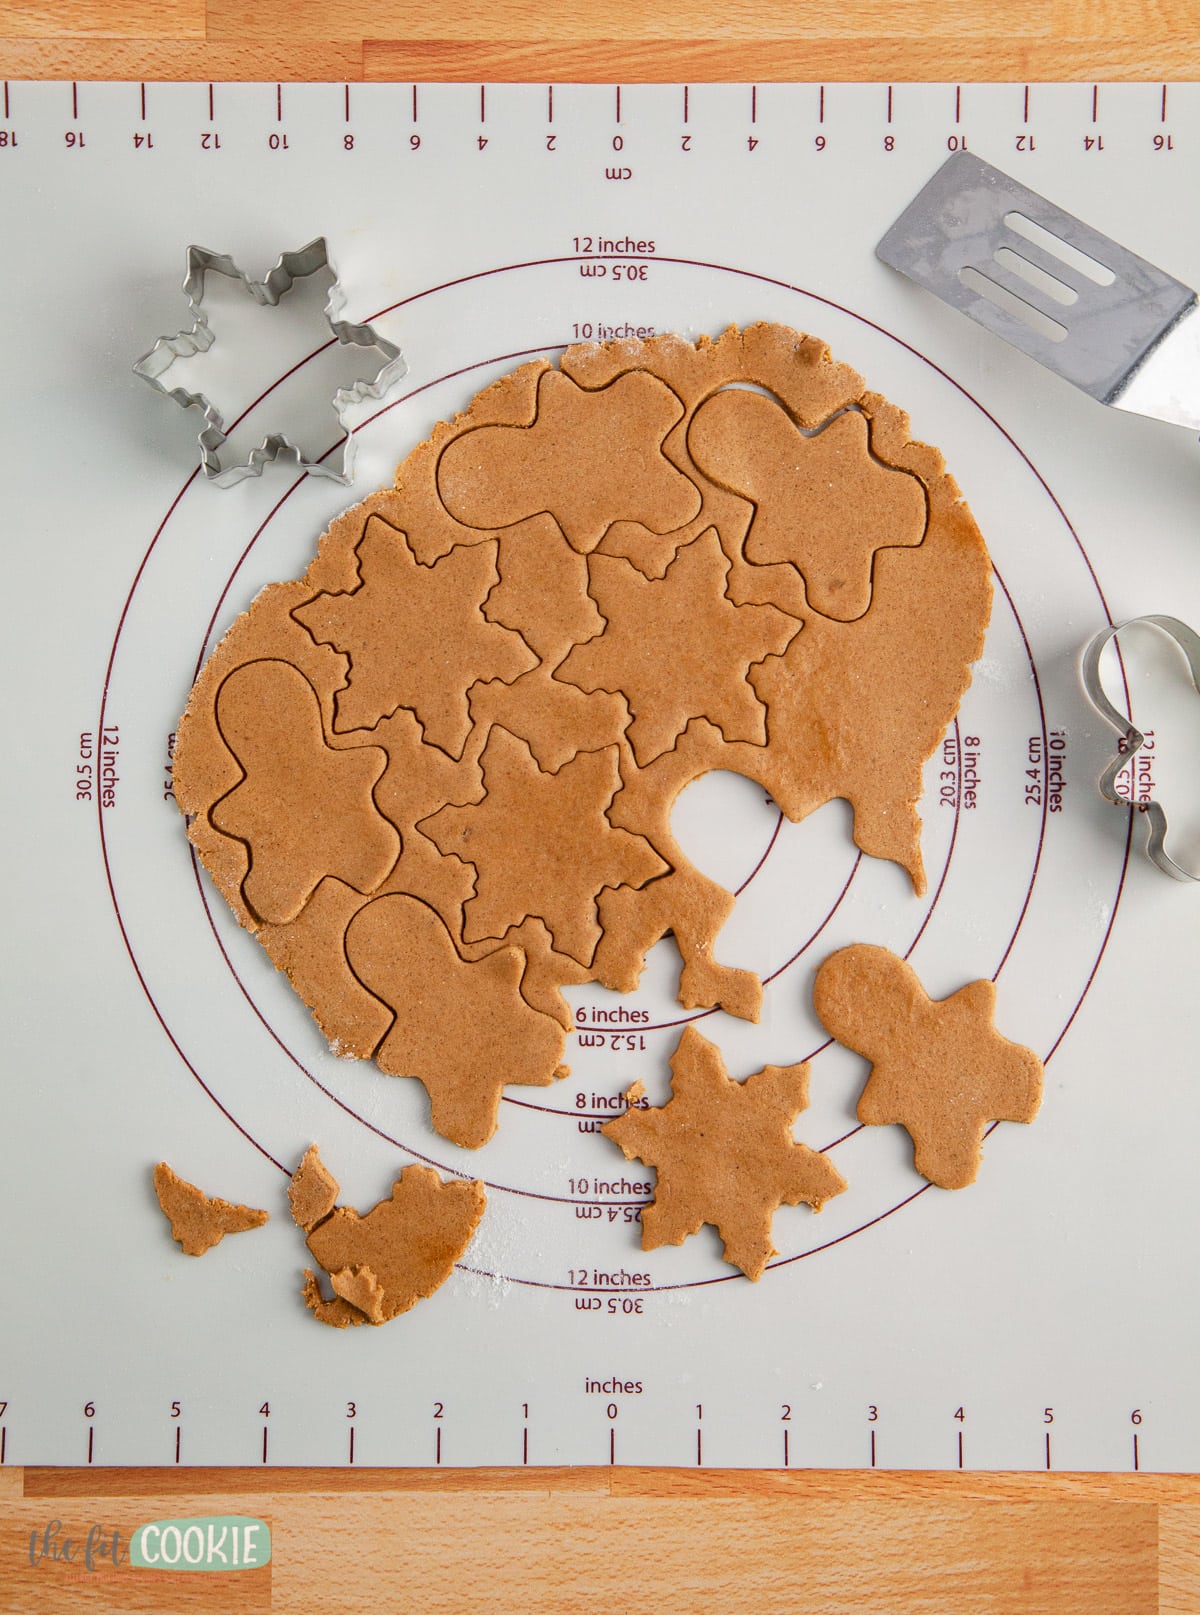 cookie dough rolled out and cut out on a silicone pastry mat